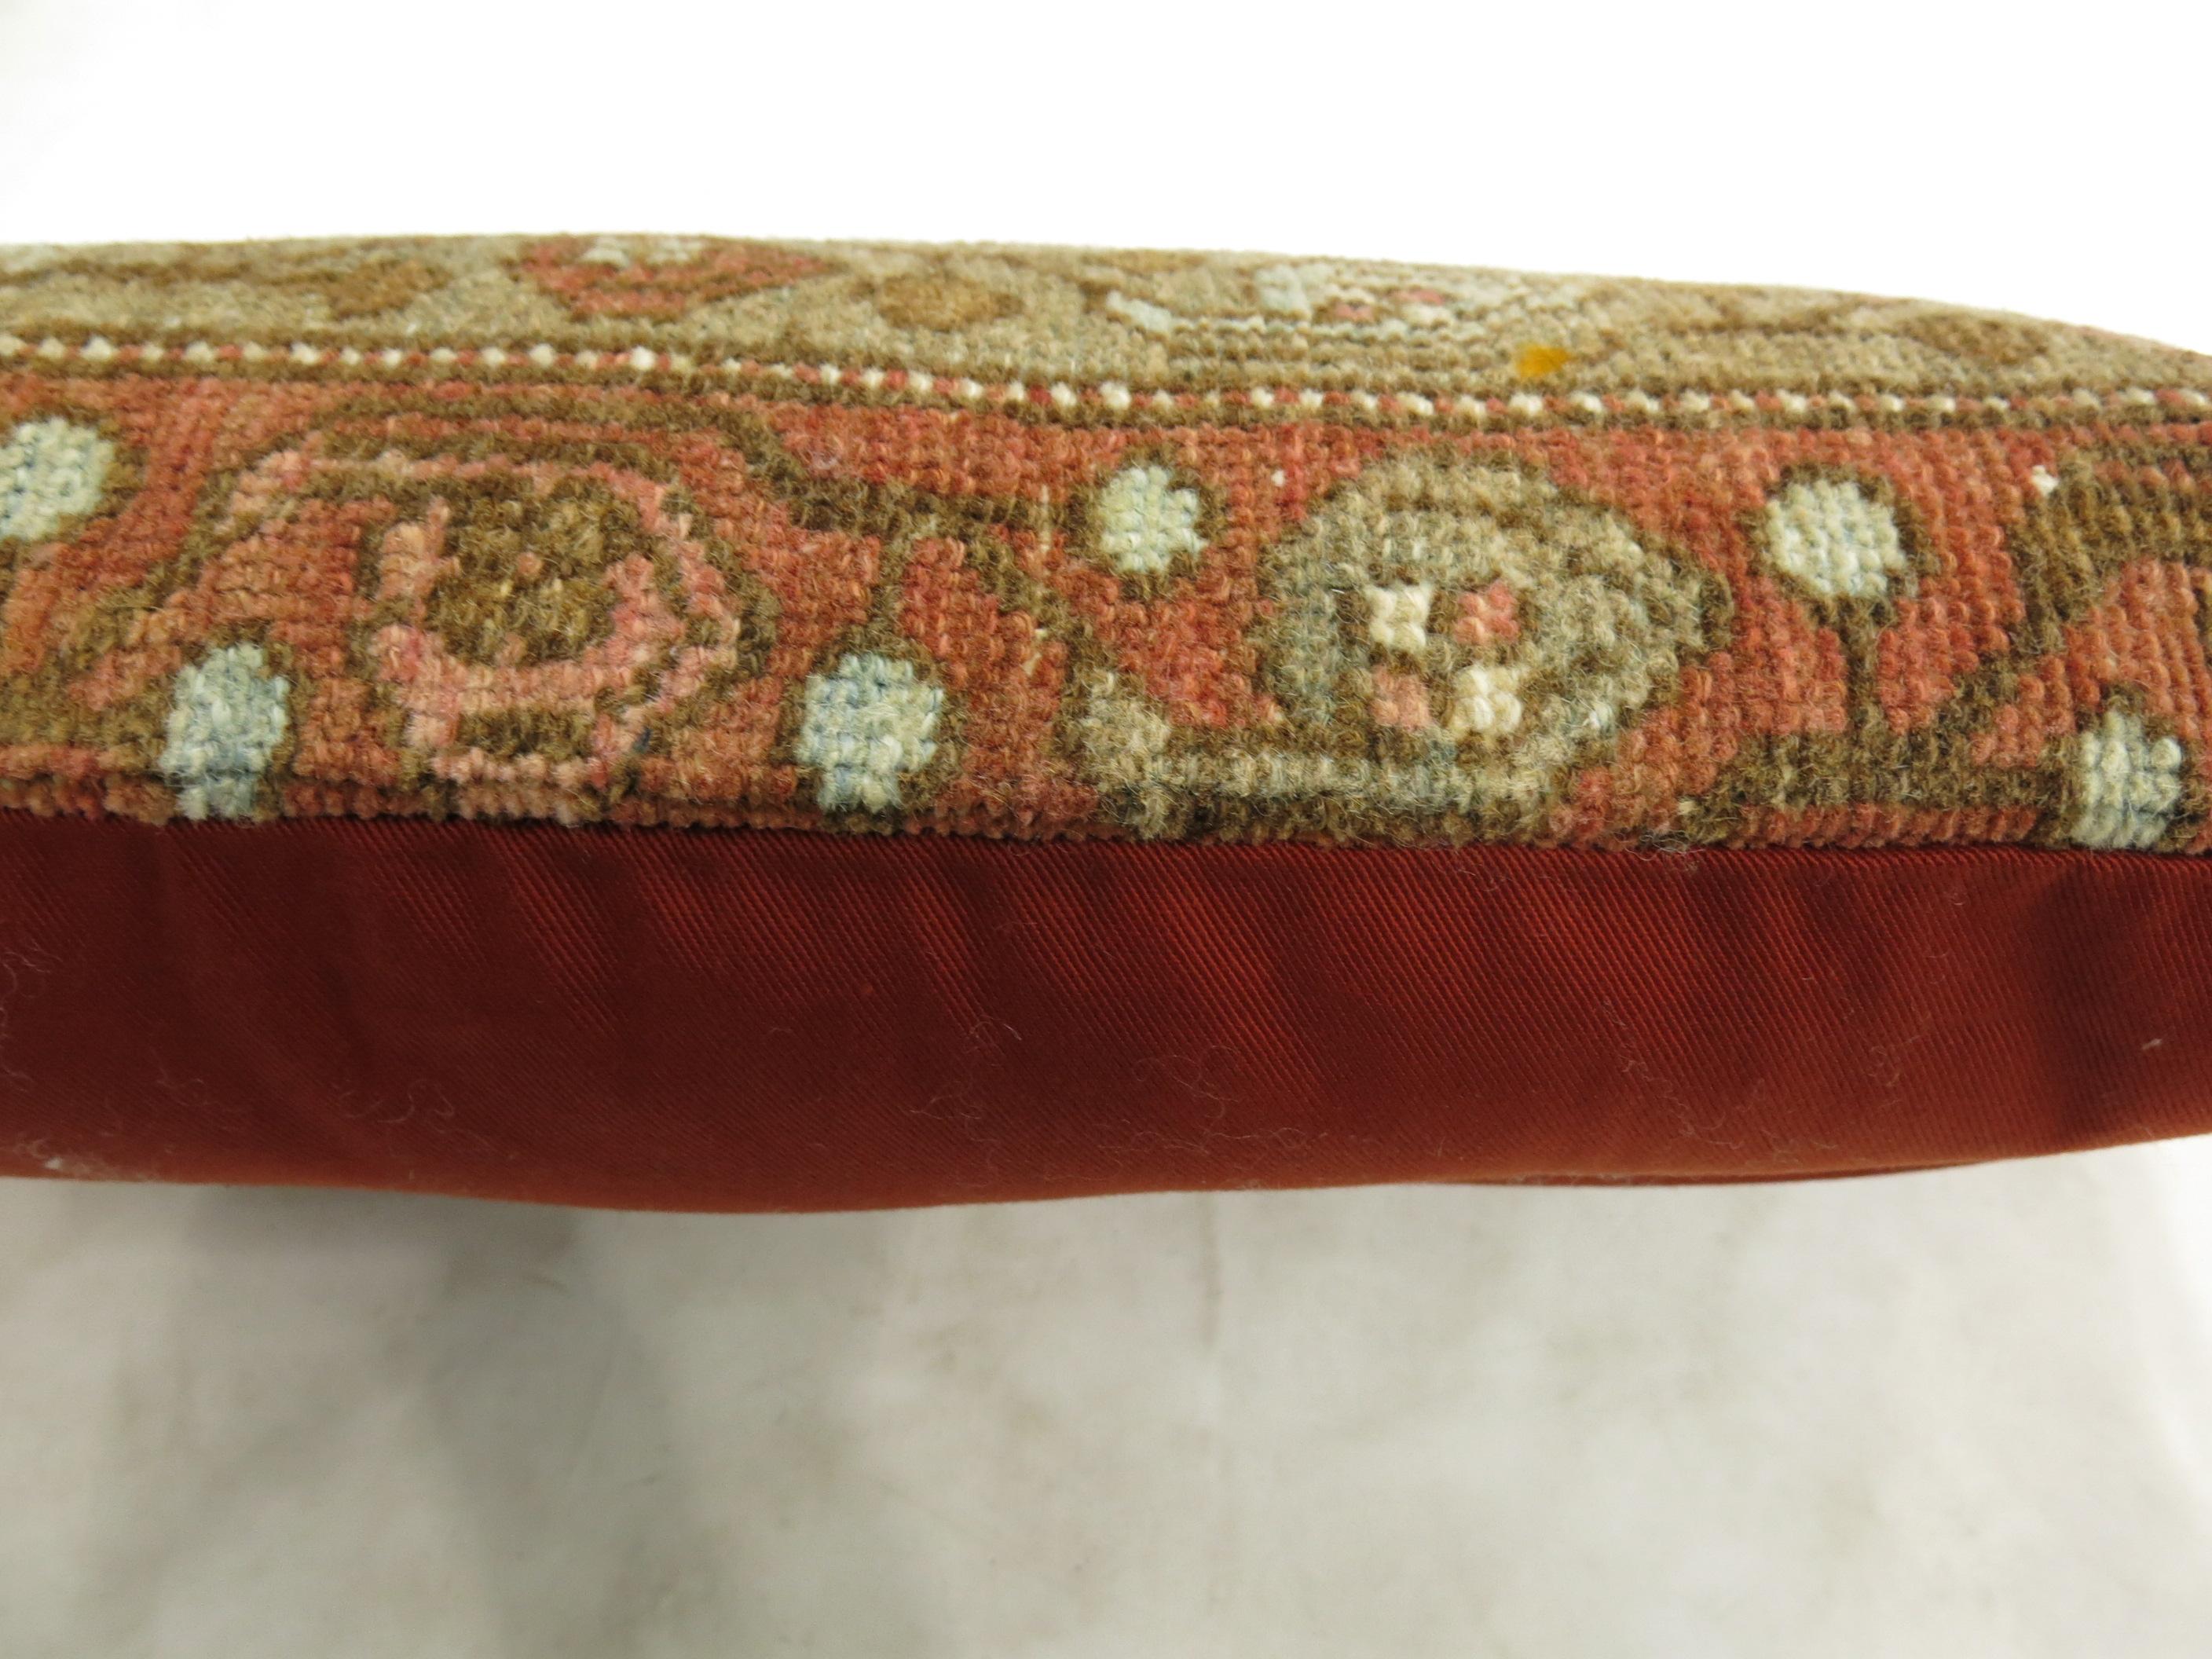 A bolster size pillow made from an early 20th century Persian rug.

Measures: 12